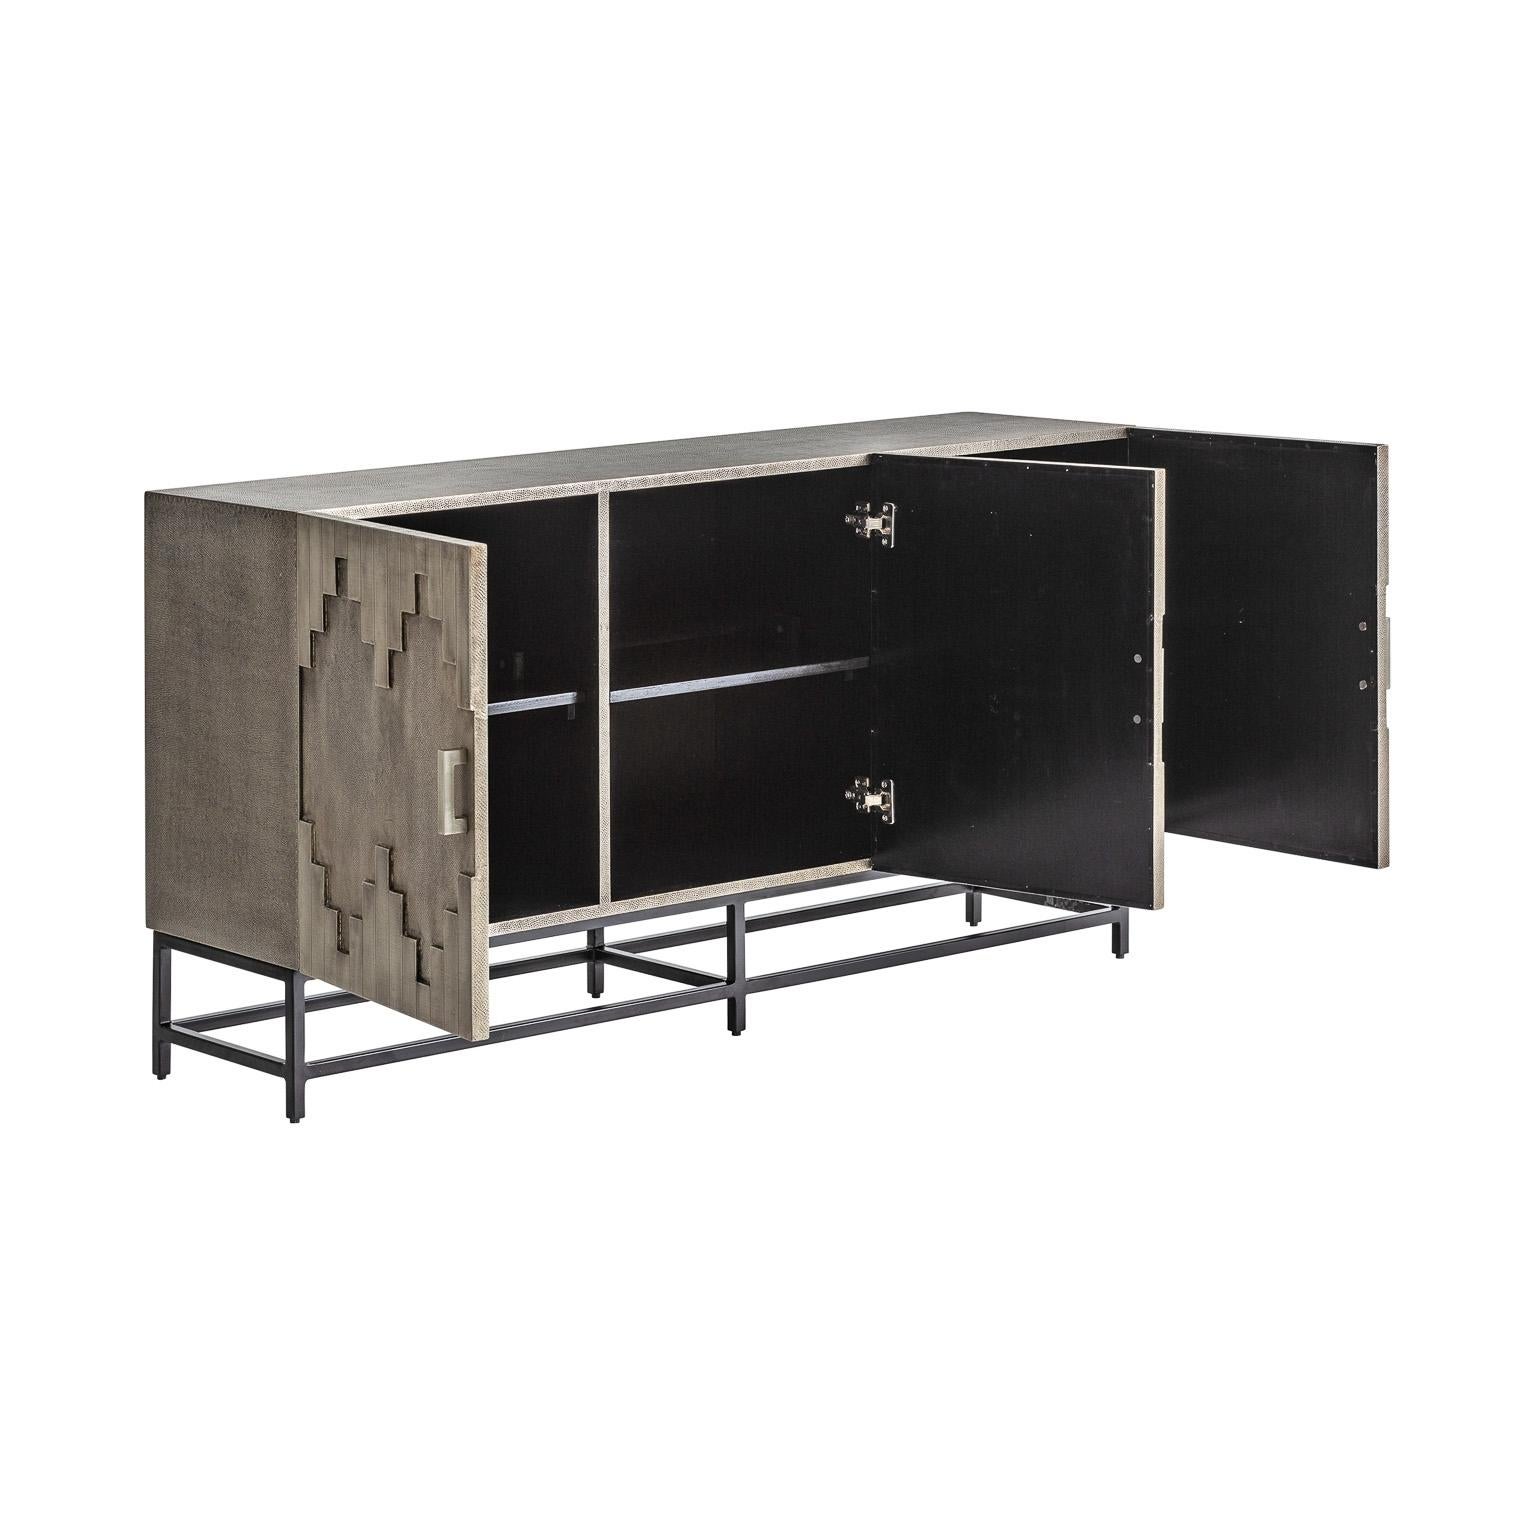 Brutalist style sideboard: An eyecatcher with geometrical and harmonious lines, composed of 3 graphic door panels adorned with metal feet opening on shelves. Patina and industrial design in new condition!